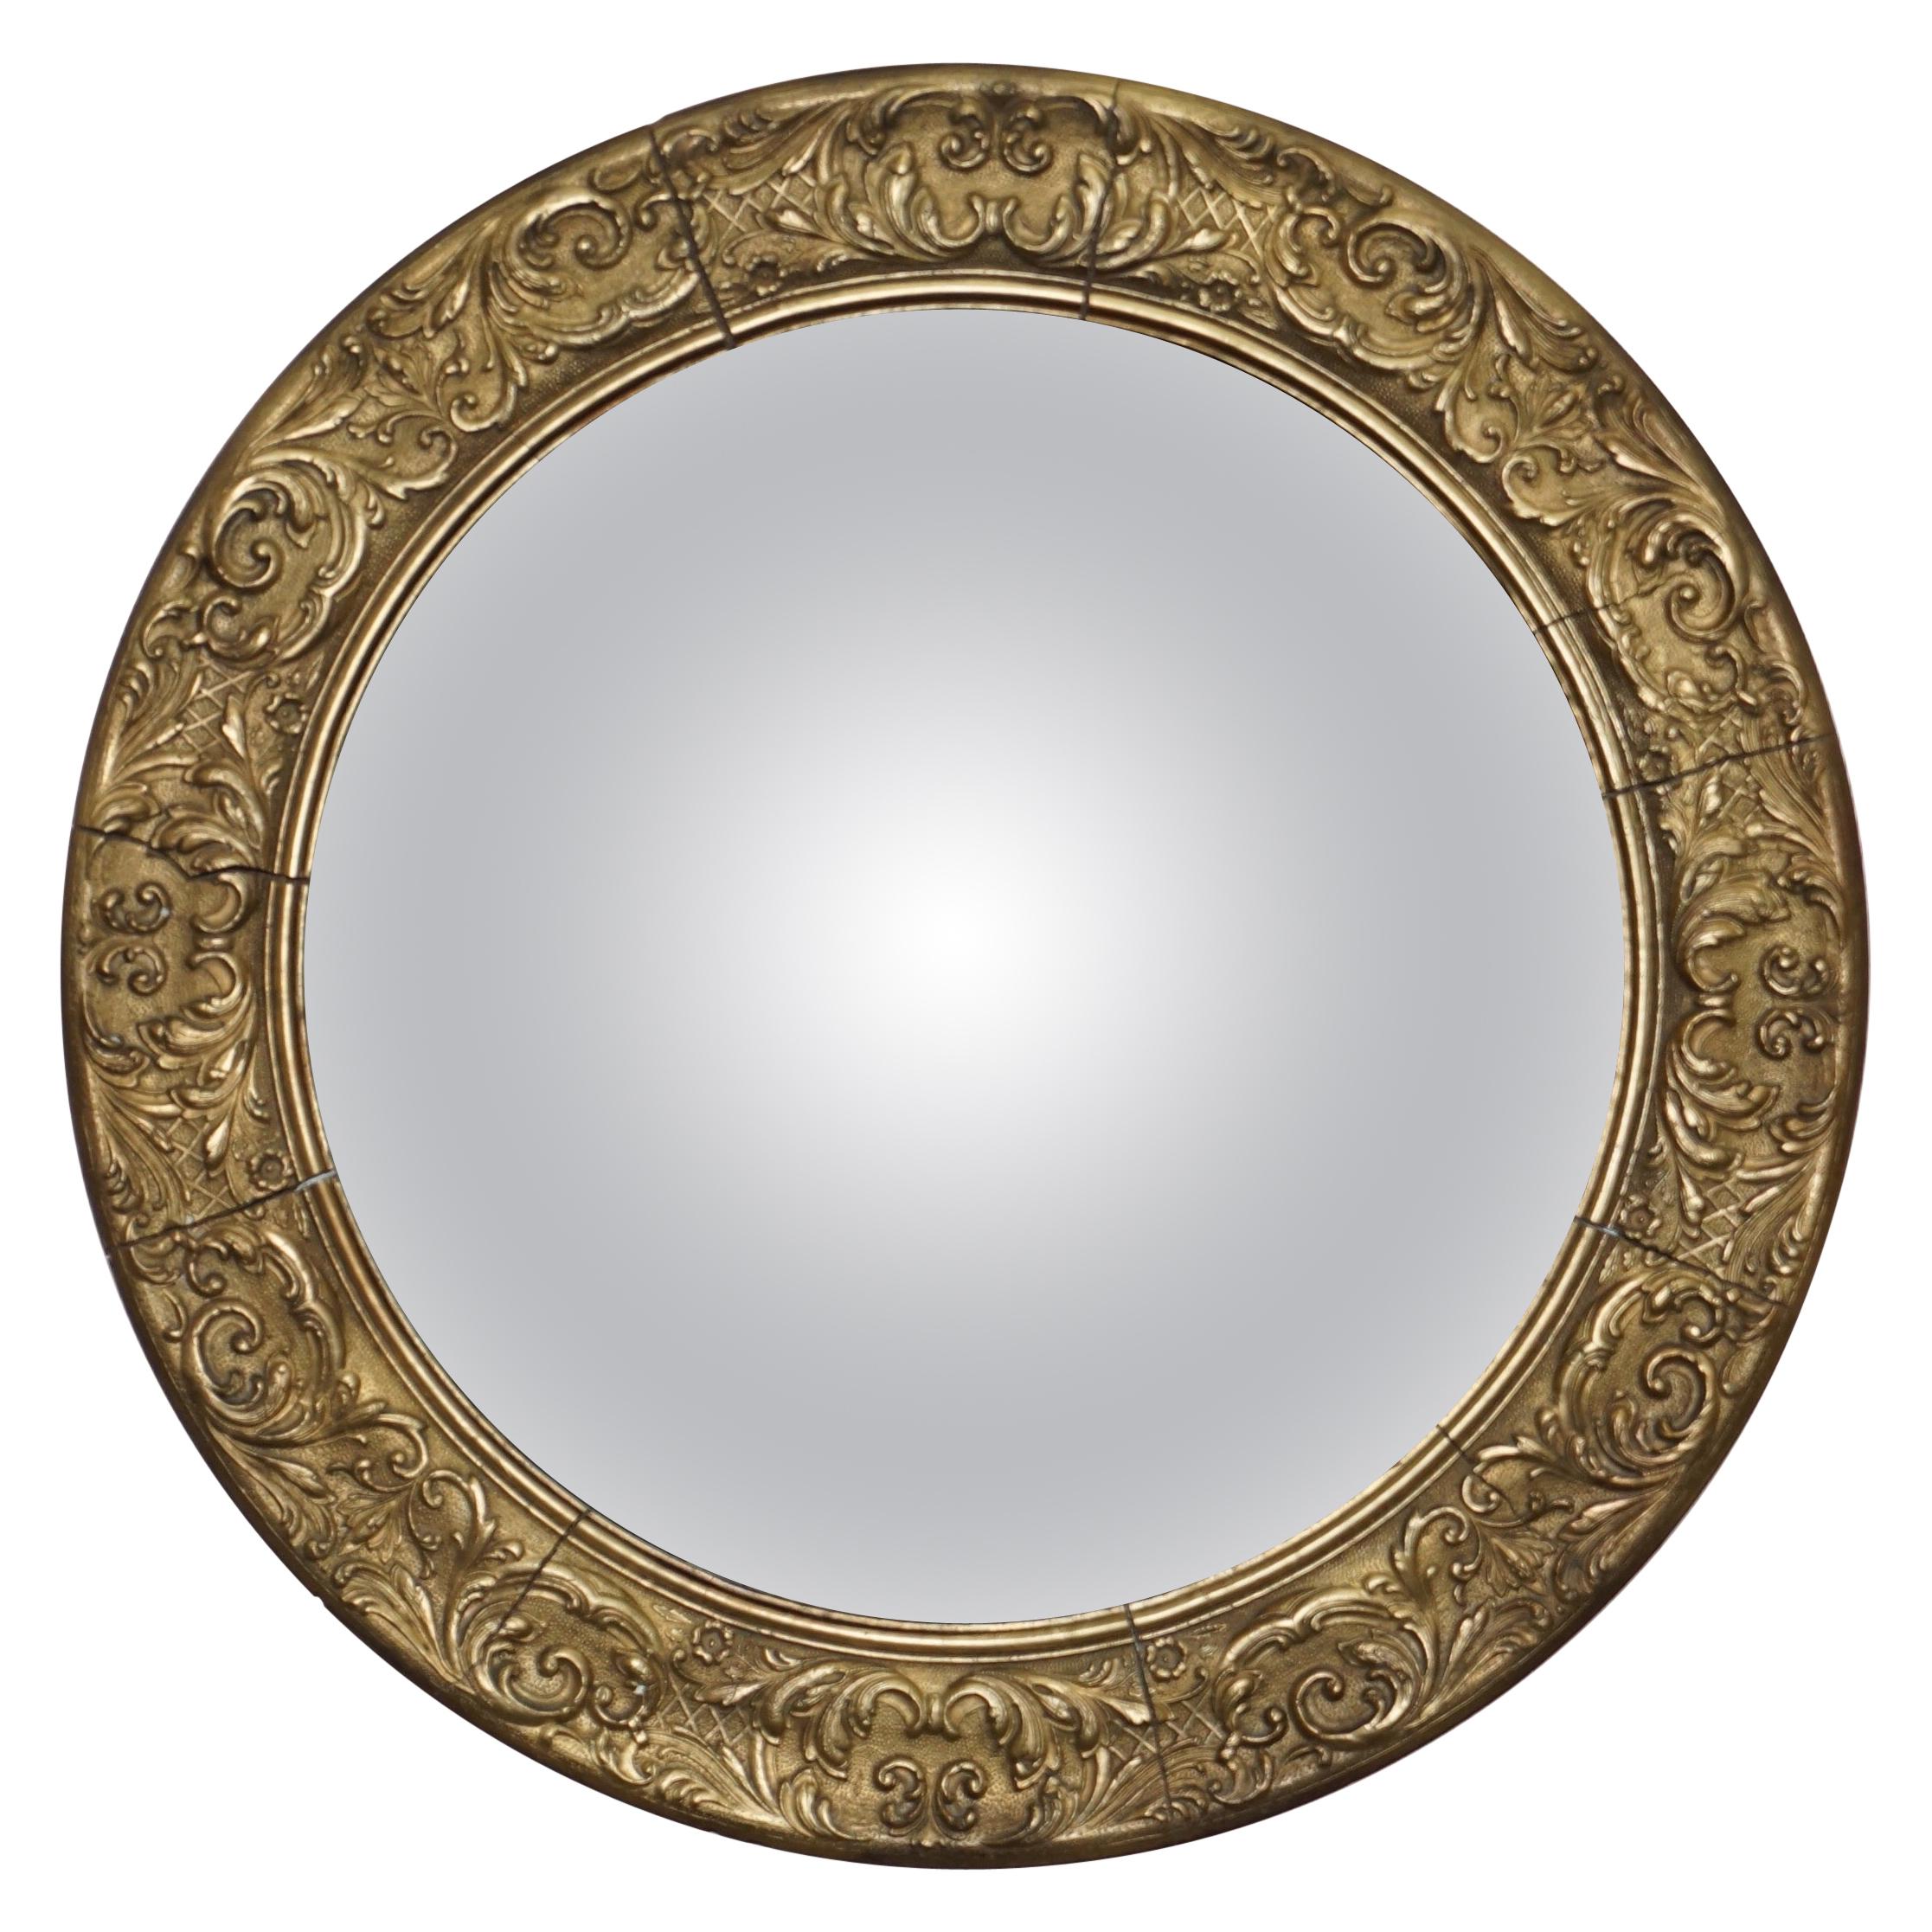 Giltwood Ornate Frame and Plaster Regency Ships Style Convex Mirror Domed Glass For Sale